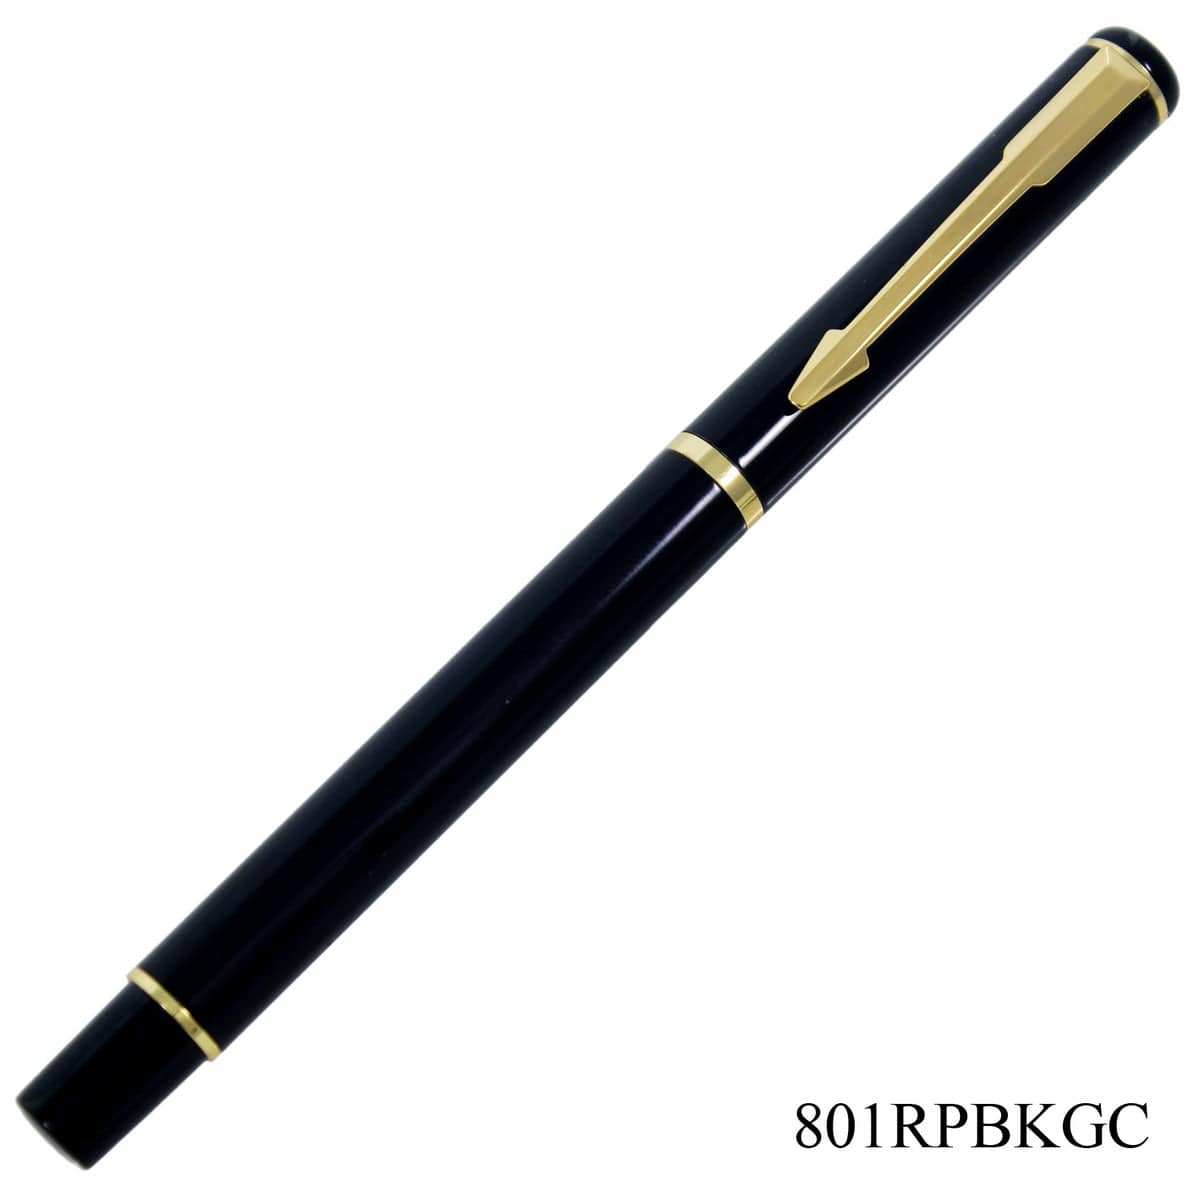 jags-mumbai Roller Pens Elevate Your Writing with the Roller Pen Black Body Golden Clip 801RPBKGC